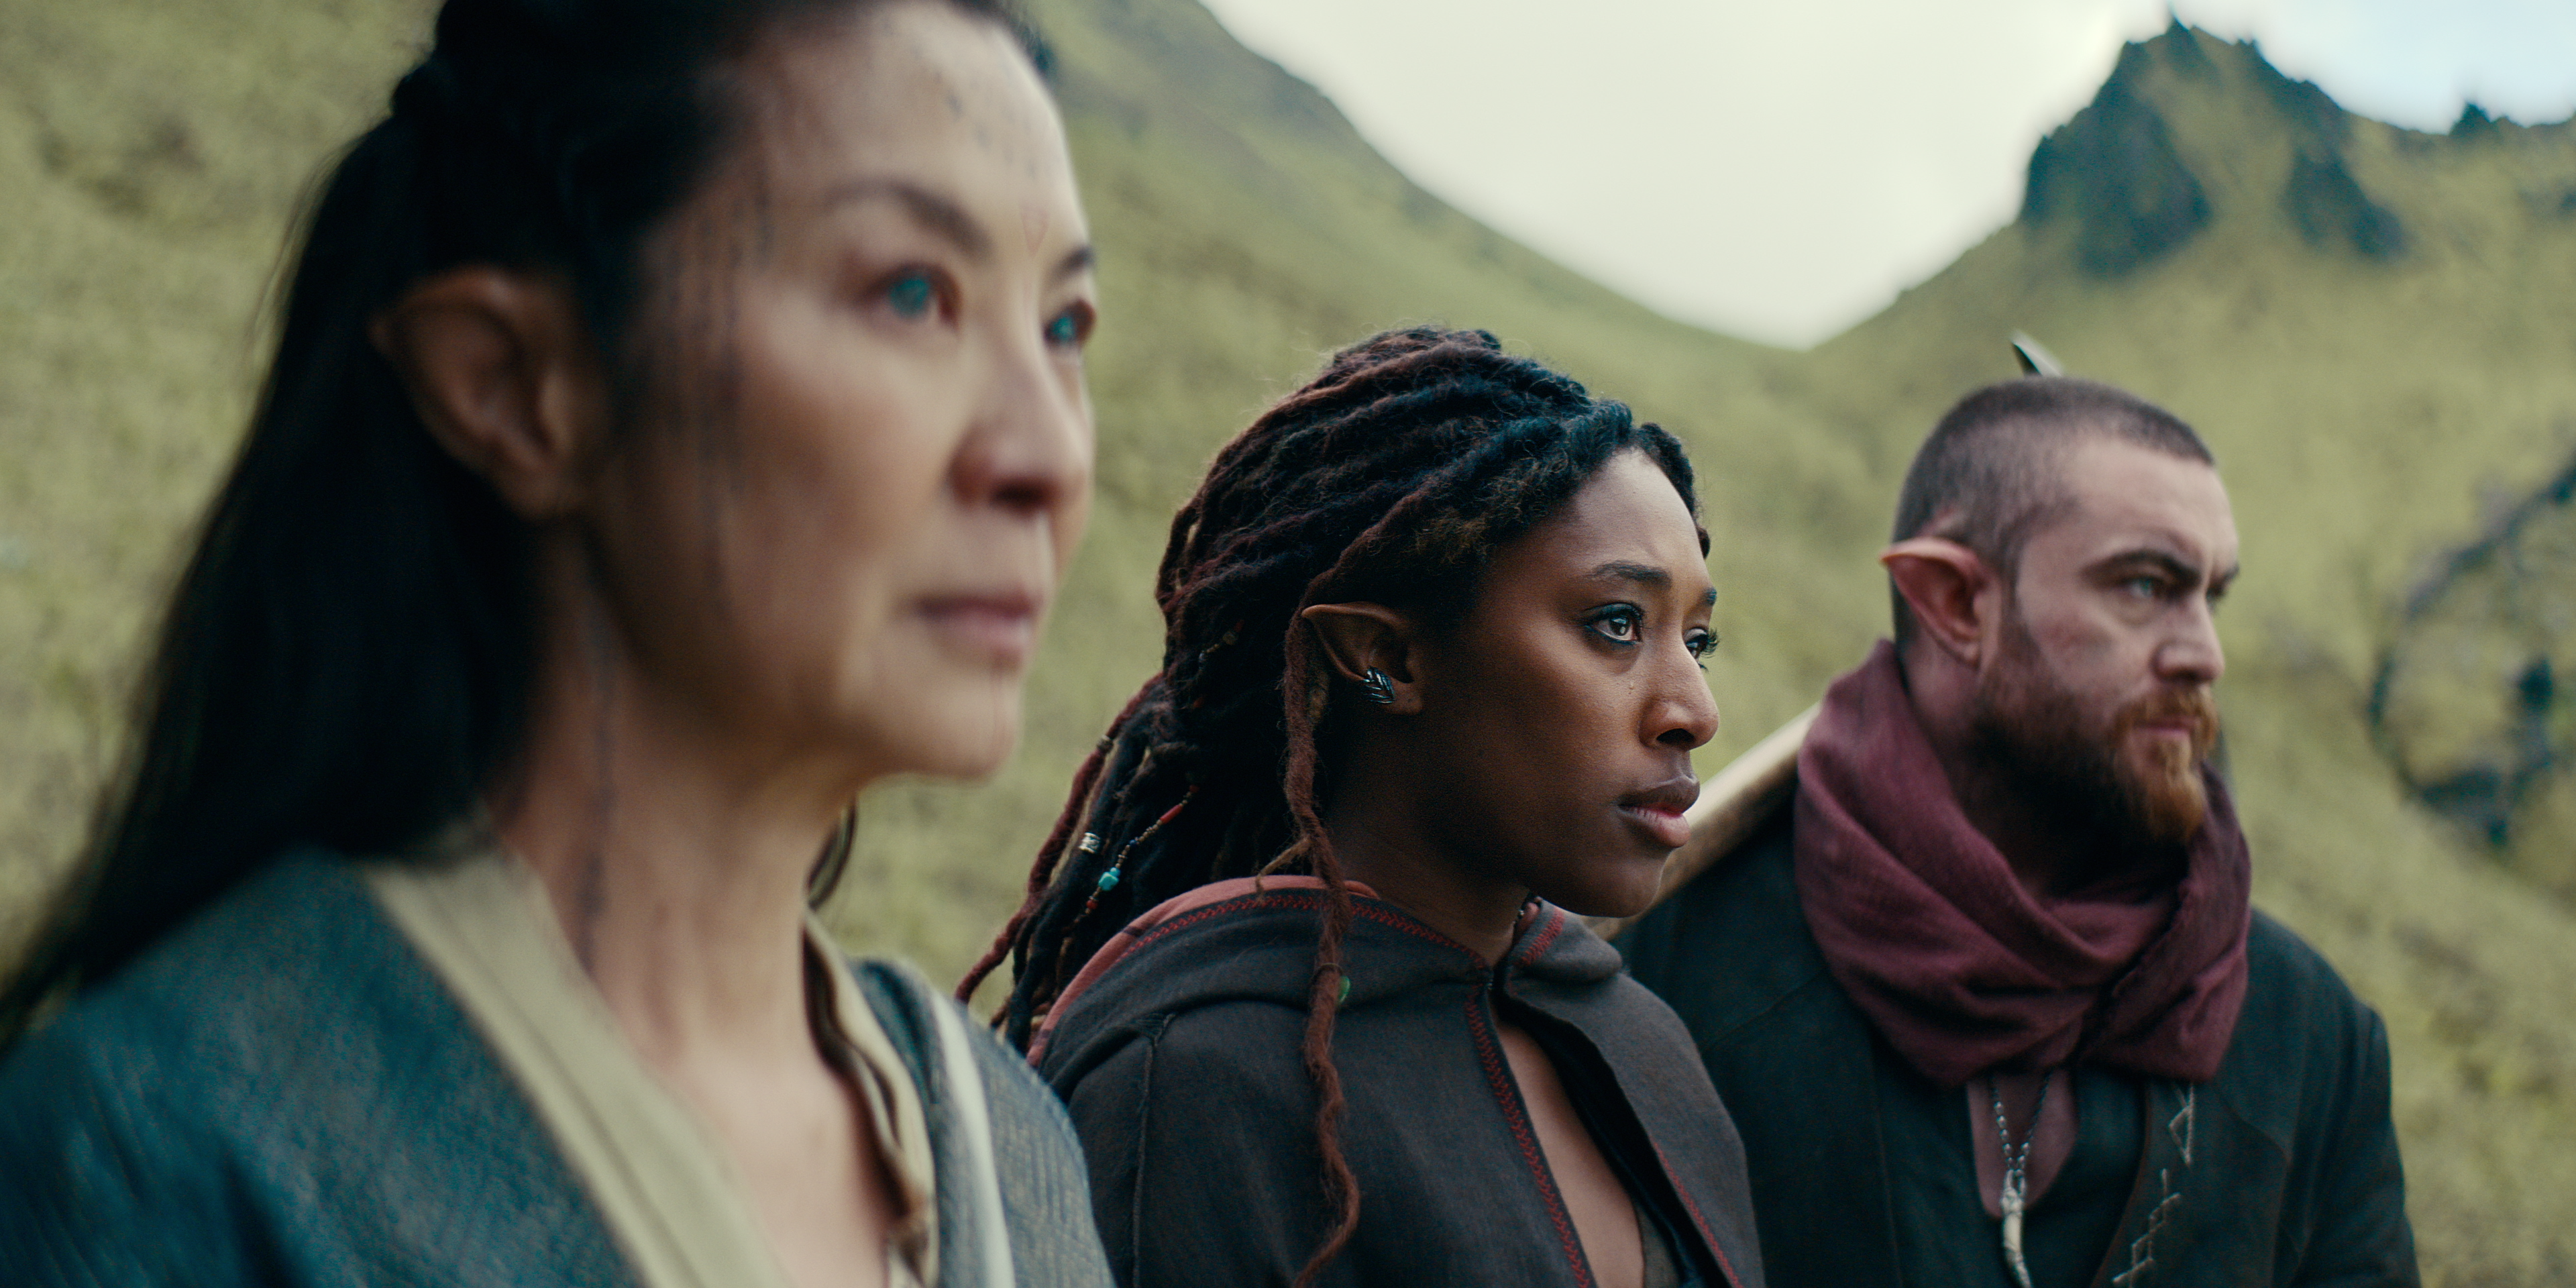 three elves — one played by michelle yeoh — stand and look to the right. next to michelle yeoh is a young Black woman and next to her is a white bearded man. they all have point ears